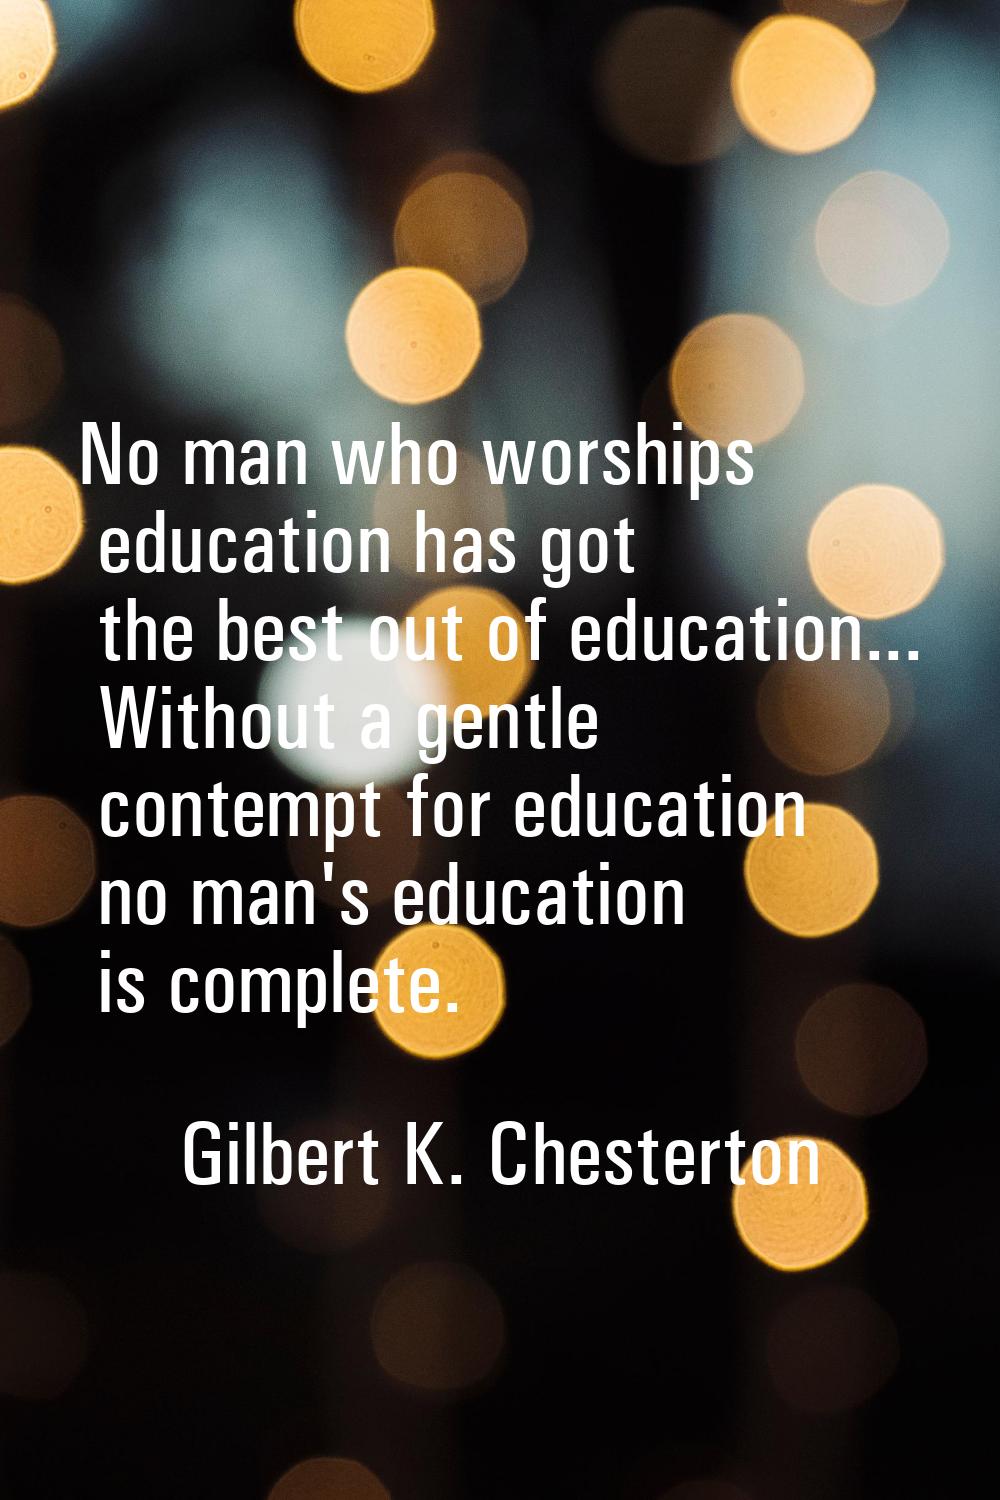 No man who worships education has got the best out of education... Without a gentle contempt for ed